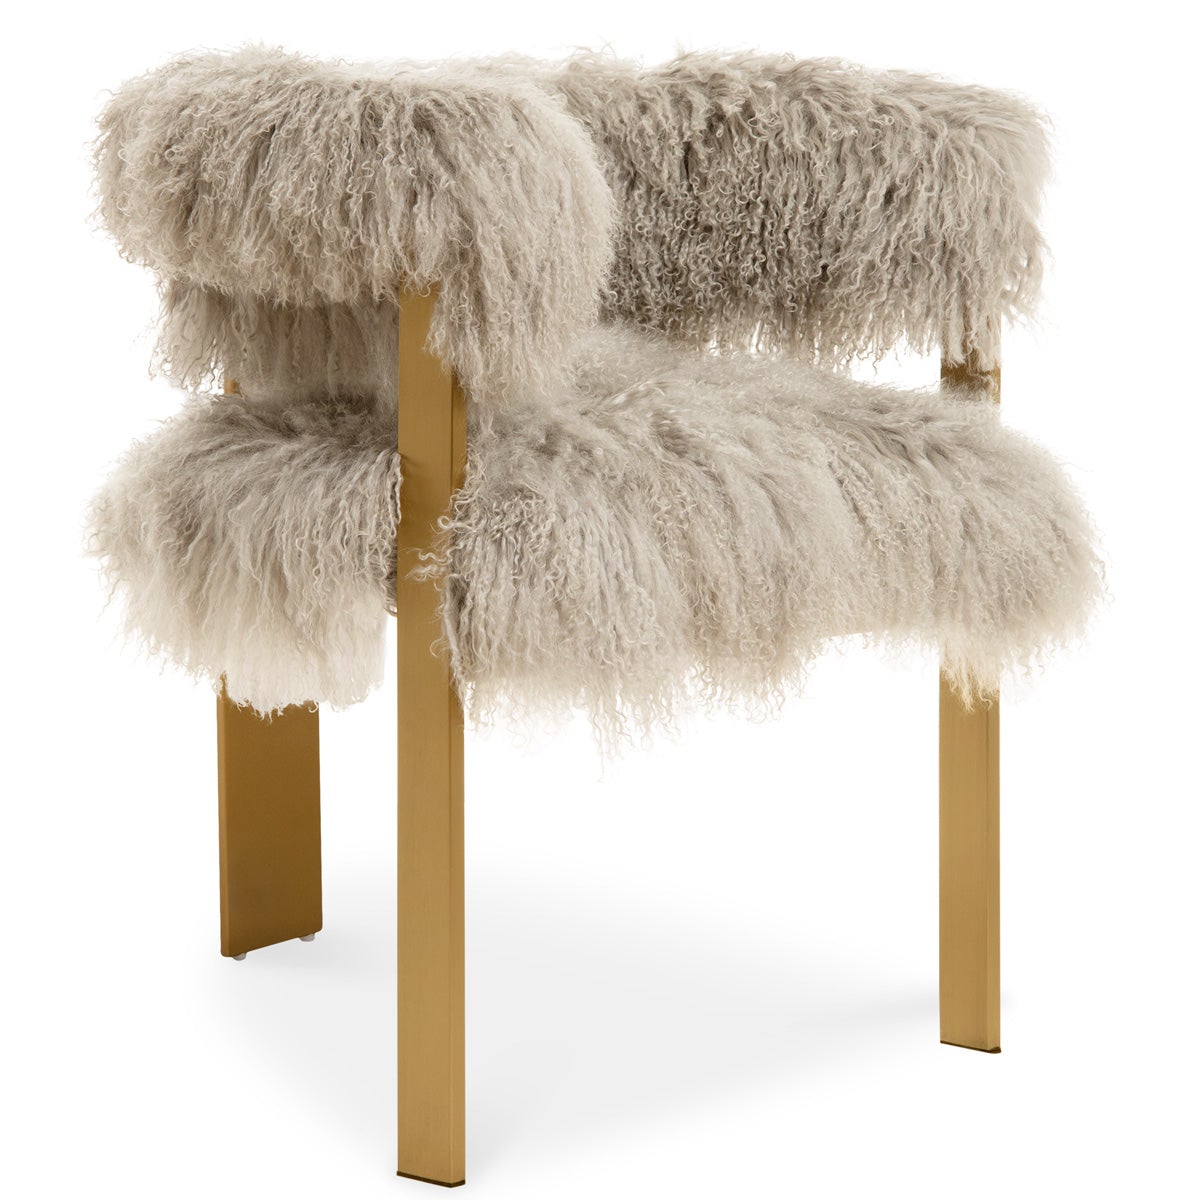 Marseille Dining Chair in Mongolian Fur - ModShop1.com